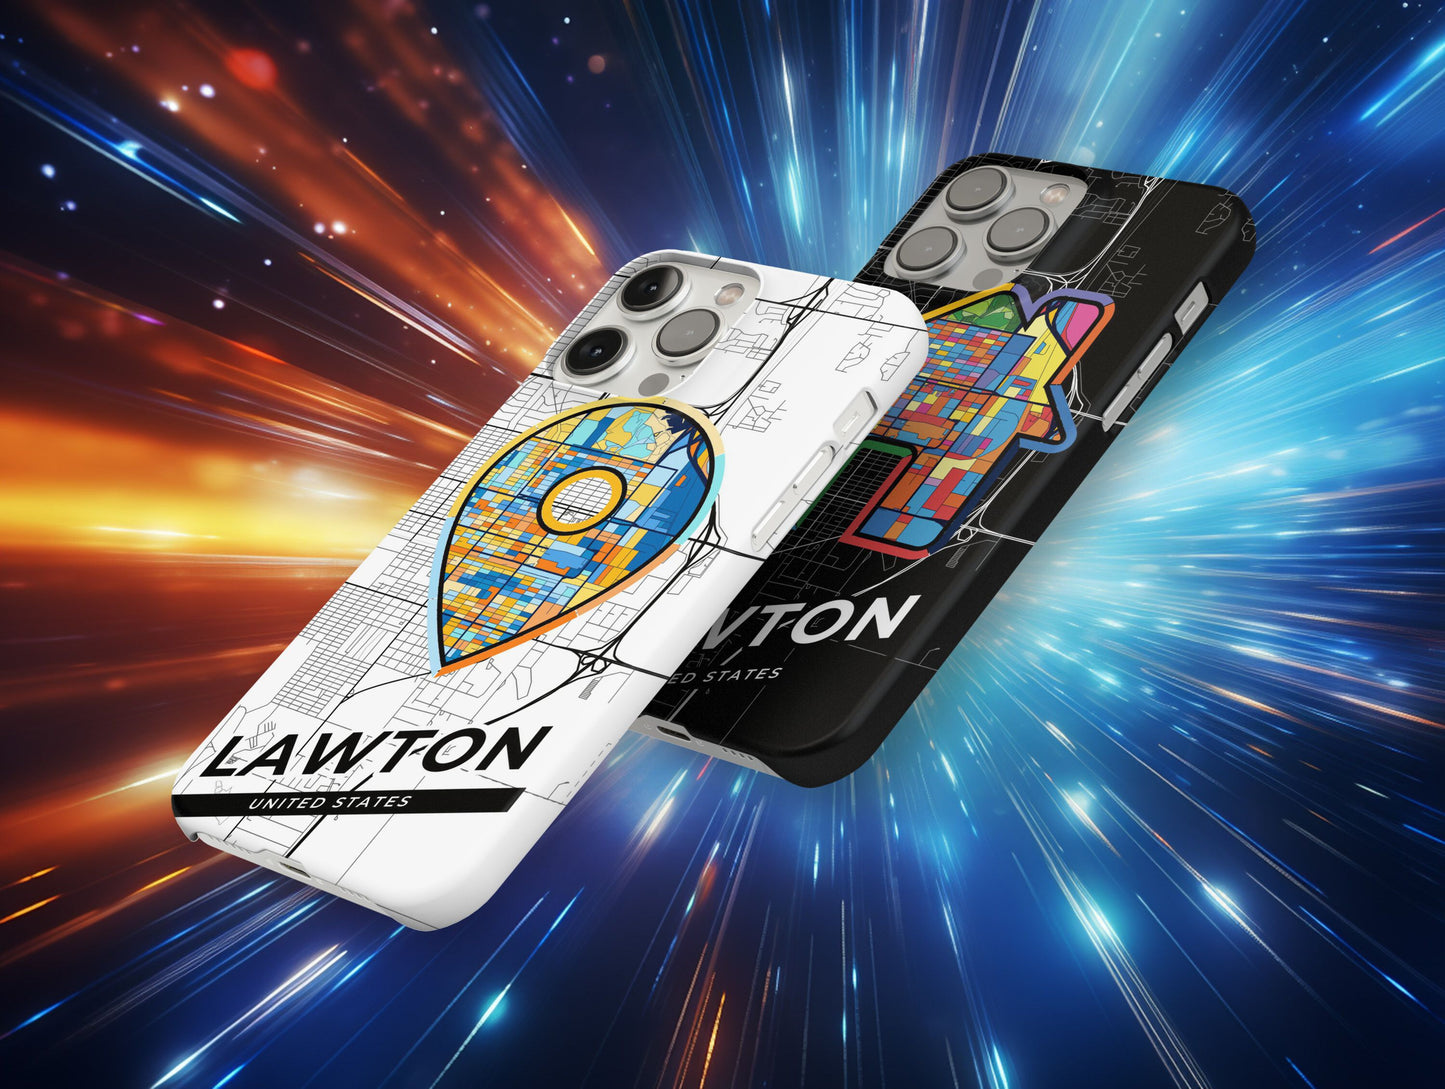 Lawton Oklahoma slim phone case with colorful icon. Birthday, wedding or housewarming gift. Couple match cases.